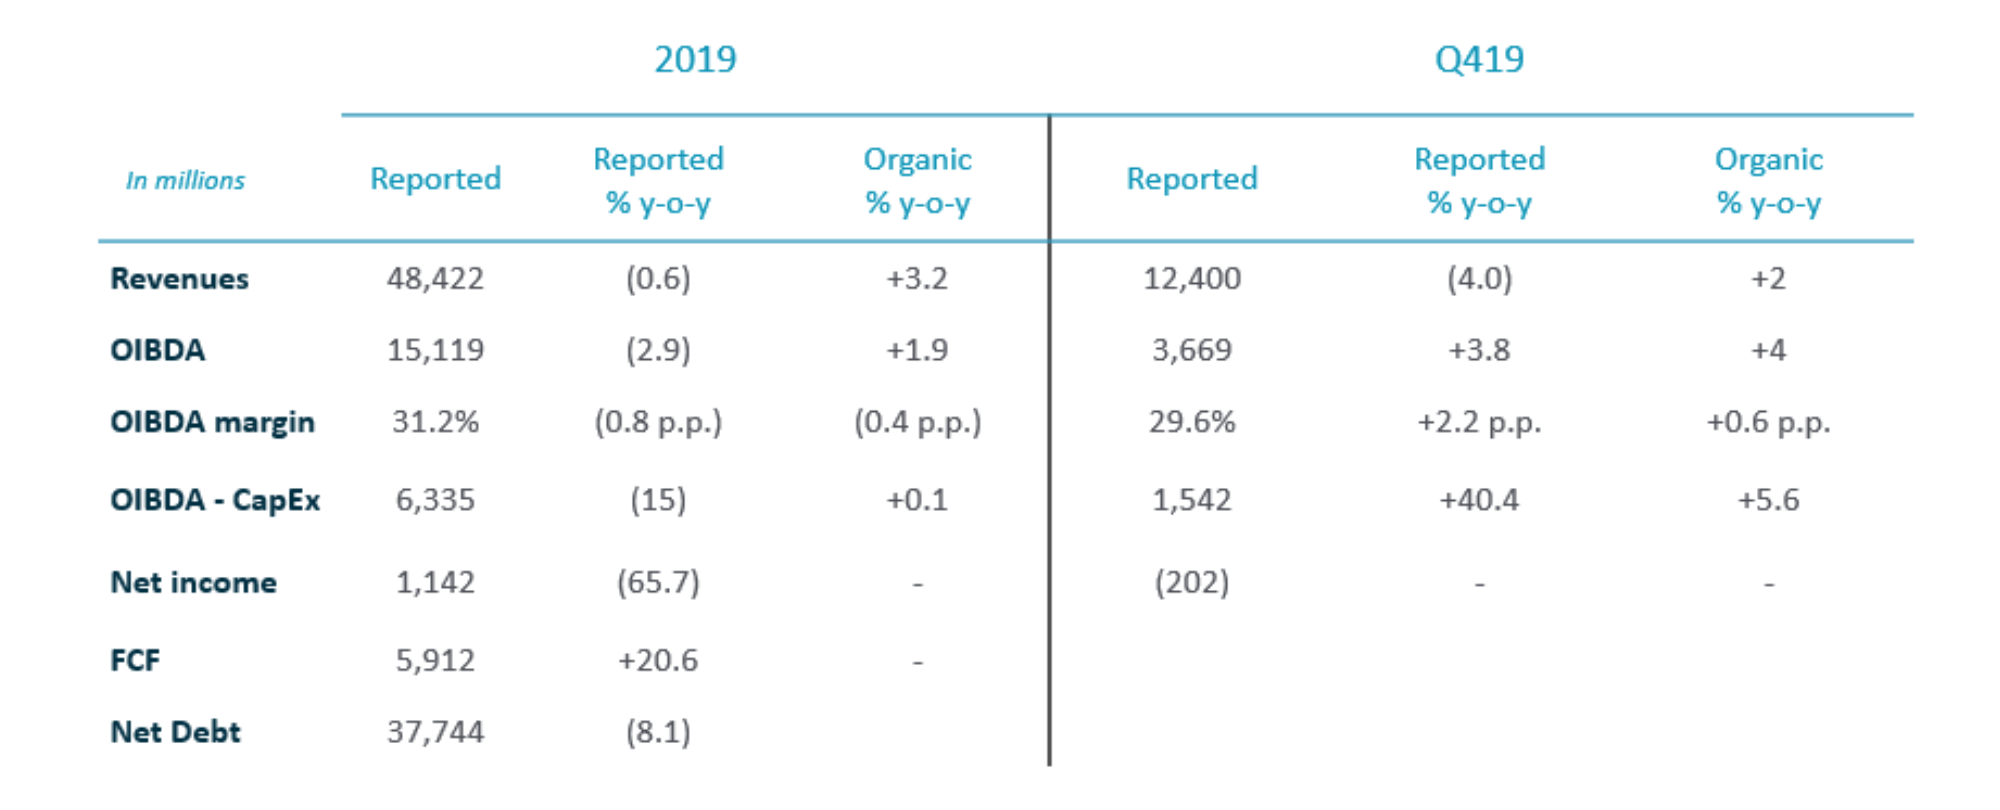 2019 Annual Financial results